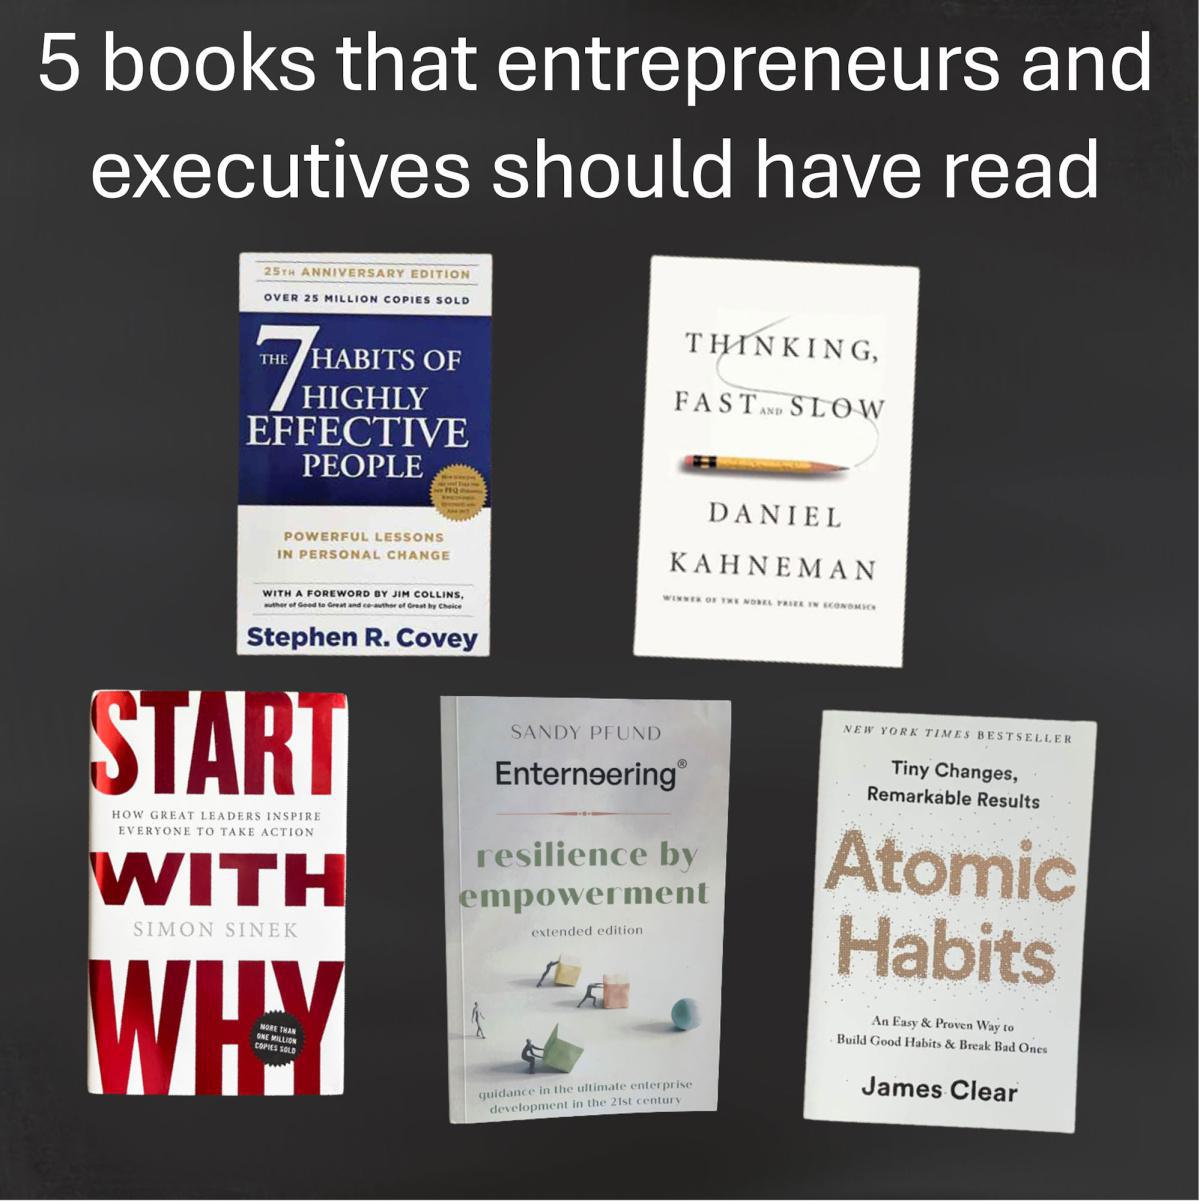 Entrepreneurs and executives should have read these 5 books